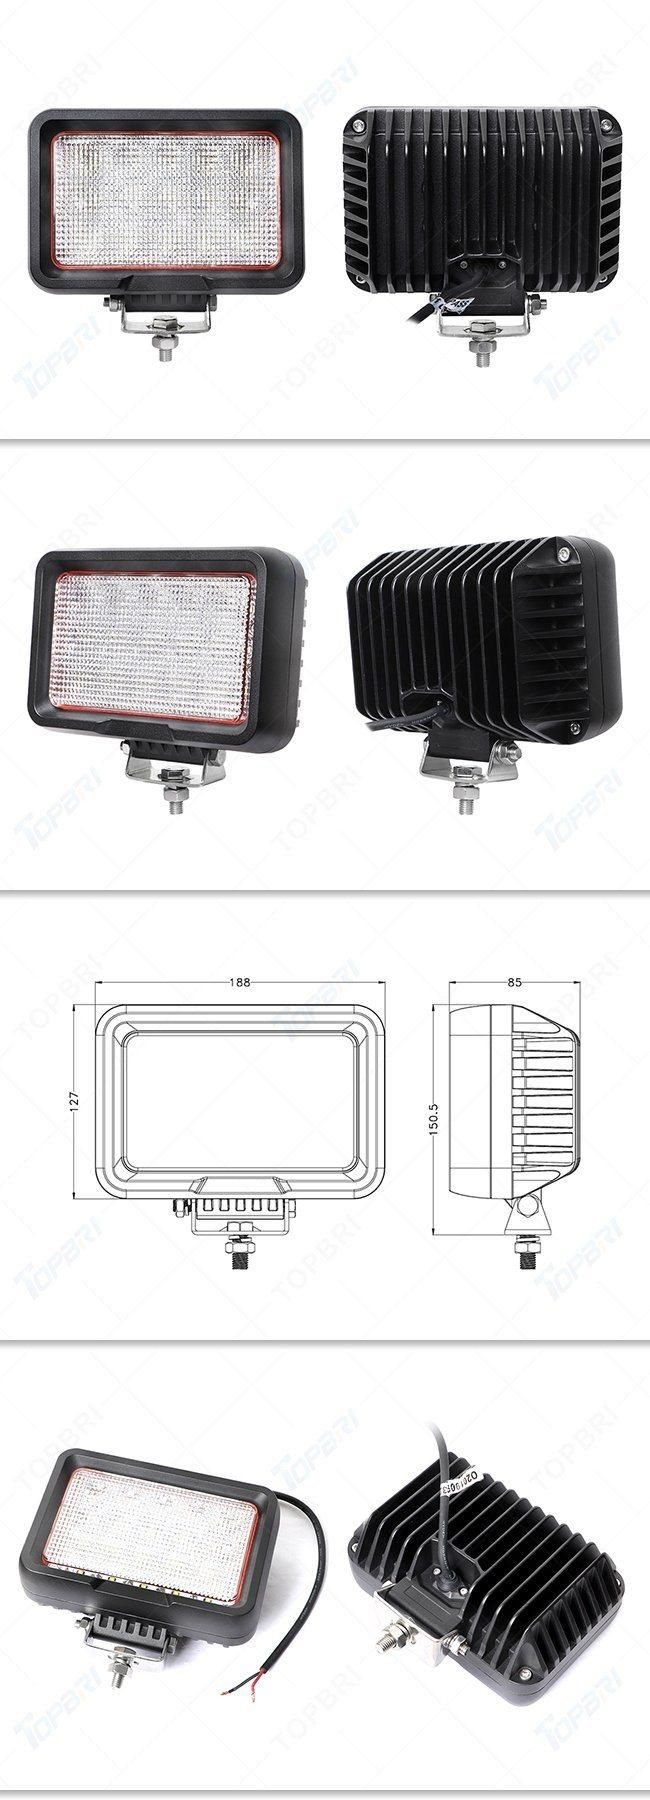 Wholesale 75W LED Working Work Light for 12 Volt Offroad Driving Tow Truck